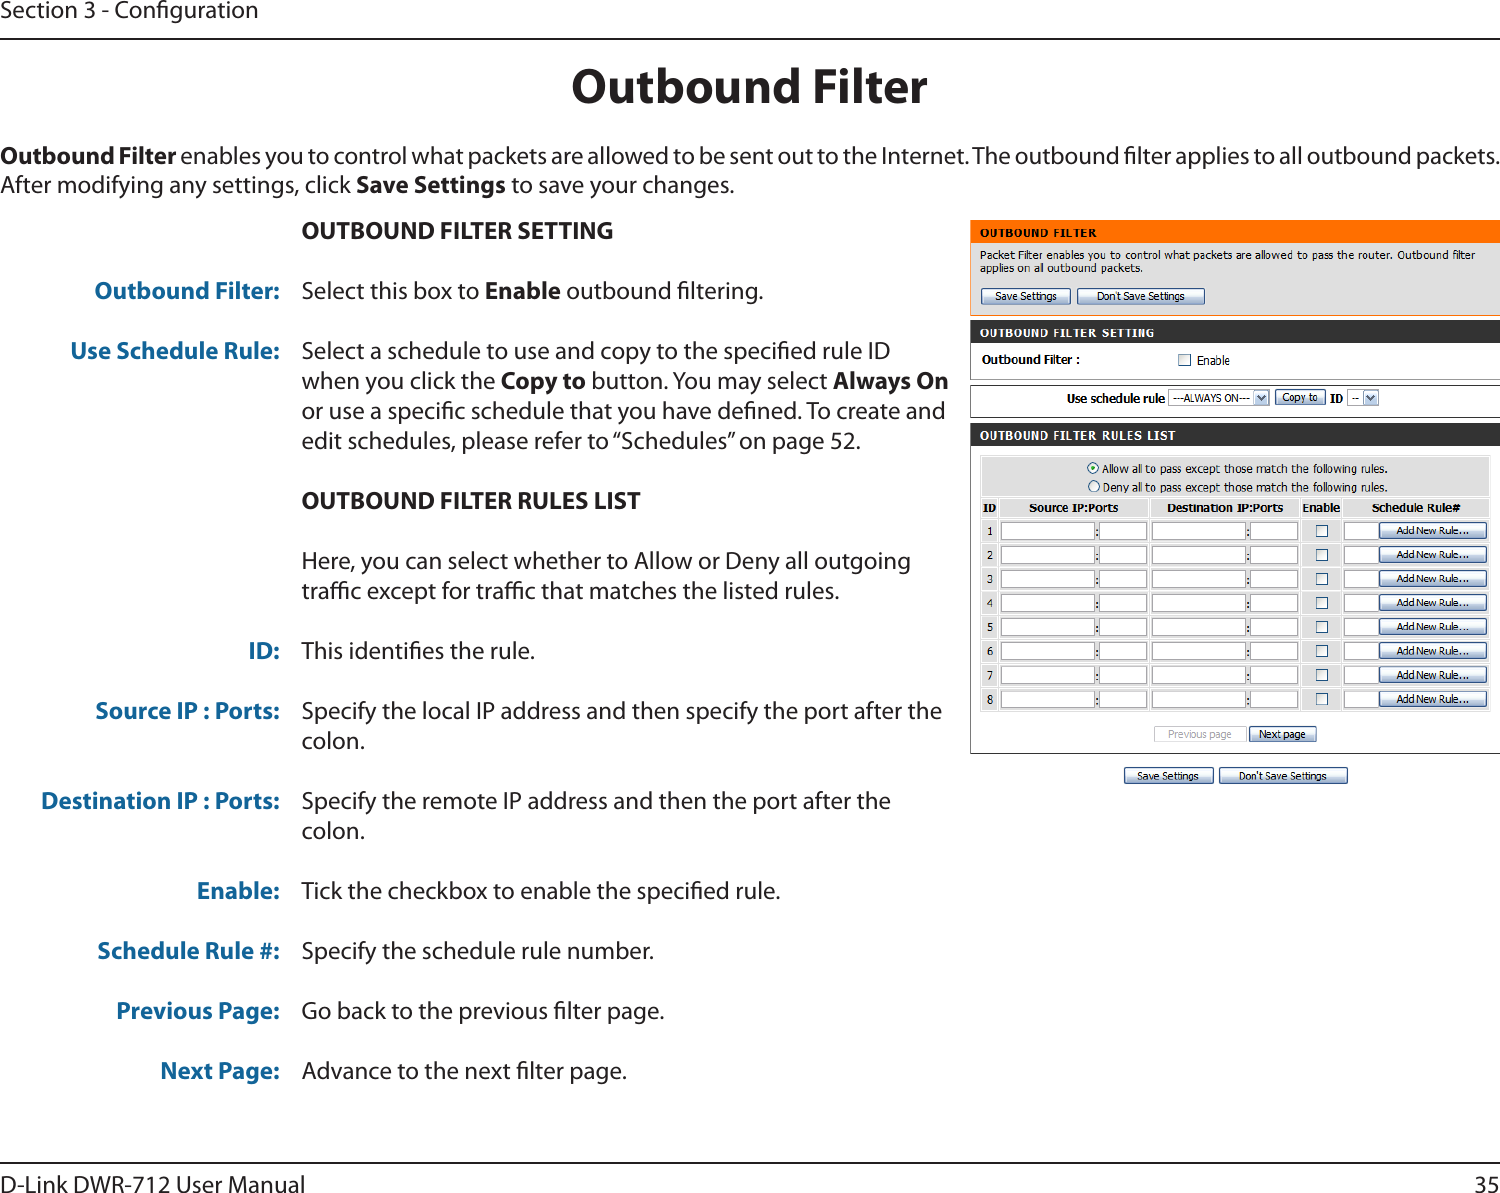 35D-Link DWR-712 User ManualSection 3 - CongurationOUTBOUND FILTER SETTINGSelect this box to Enable outbound ltering.Select a schedule to use and copy to the specied rule ID when you click the Copy to button. You may select Always On or use a specic schedule that you have dened. To create and edit schedules, please refer to “Schedules” on page 52.OUTBOUND FILTER RULES LISTHere, you can select whether to Allow or Deny all outgoing trac except for trac that matches the listed rules.This identies the rule.Specify the local IP address and then specify the port after the colon.Specify the remote IP address and then the port after the colon.Tick the checkbox to enable the specied rule.Specify the schedule rule number.Go back to the previous lter page.Advance to the next lter page.Outbound FilterOutbound Filter:Use Schedule Rule:ID:Source IP : Ports: Destination IP : Ports: Enable:Schedule Rule #:Previous Page:Next Page:Outbound Filter enables you to control what packets are allowed to be sent out to the Internet. The outbound lter applies to all outbound packets. After modifying any settings, click Save Settings to save your changes.